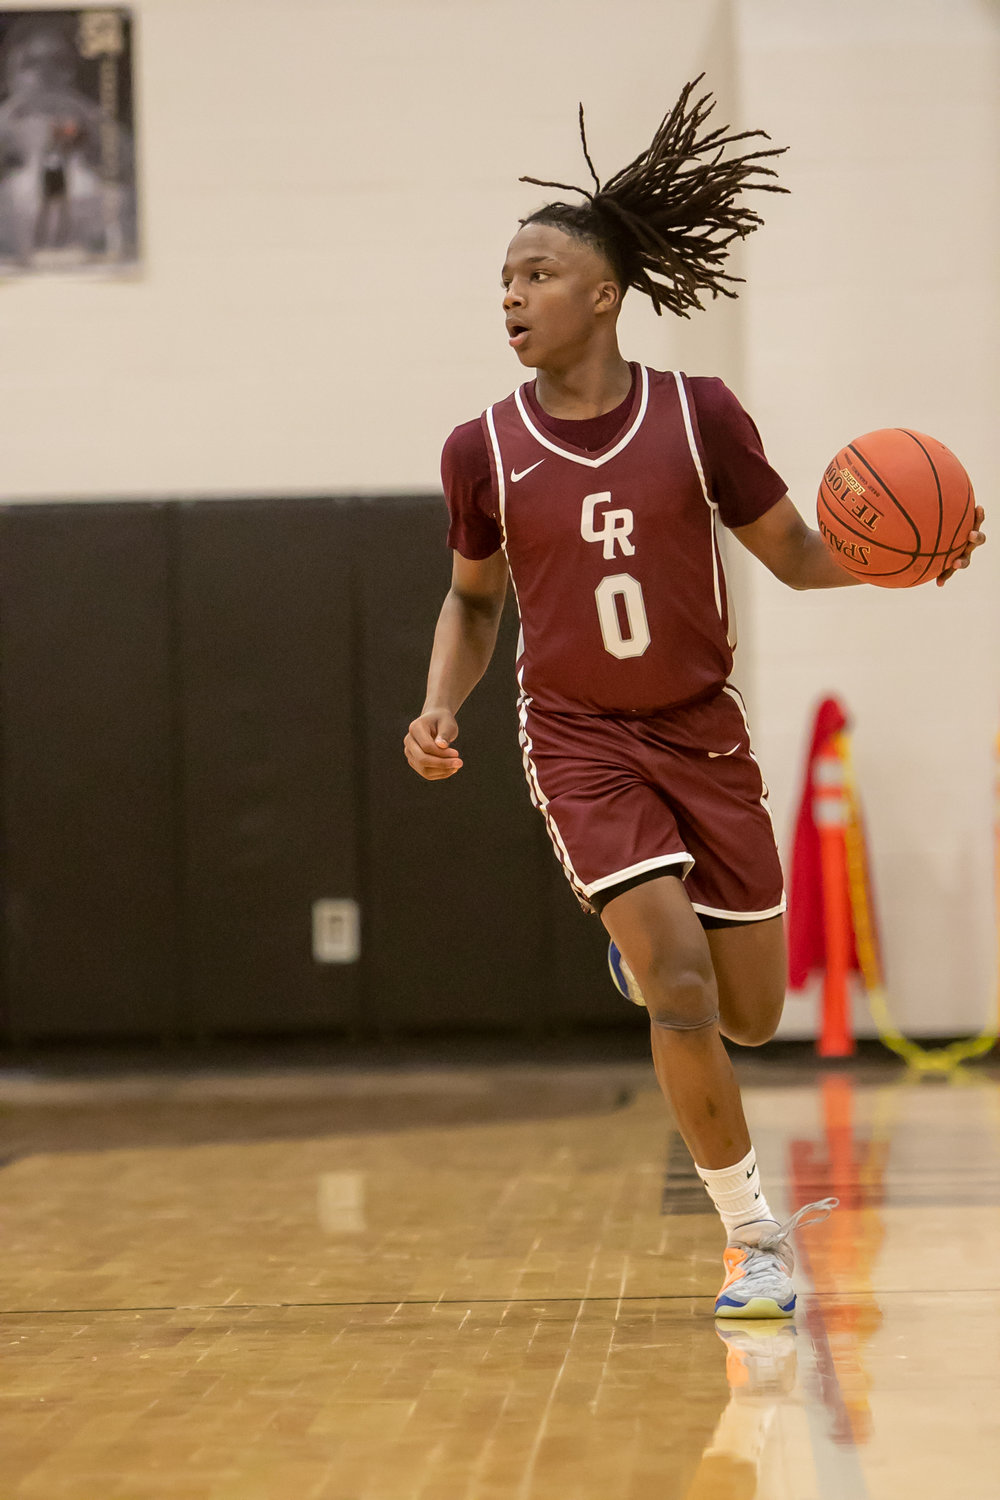 Prince Jones Bynum dribbles the ball up the court during Tuesday's game between Cinco Ranch and Jordan at the Jordan gym.